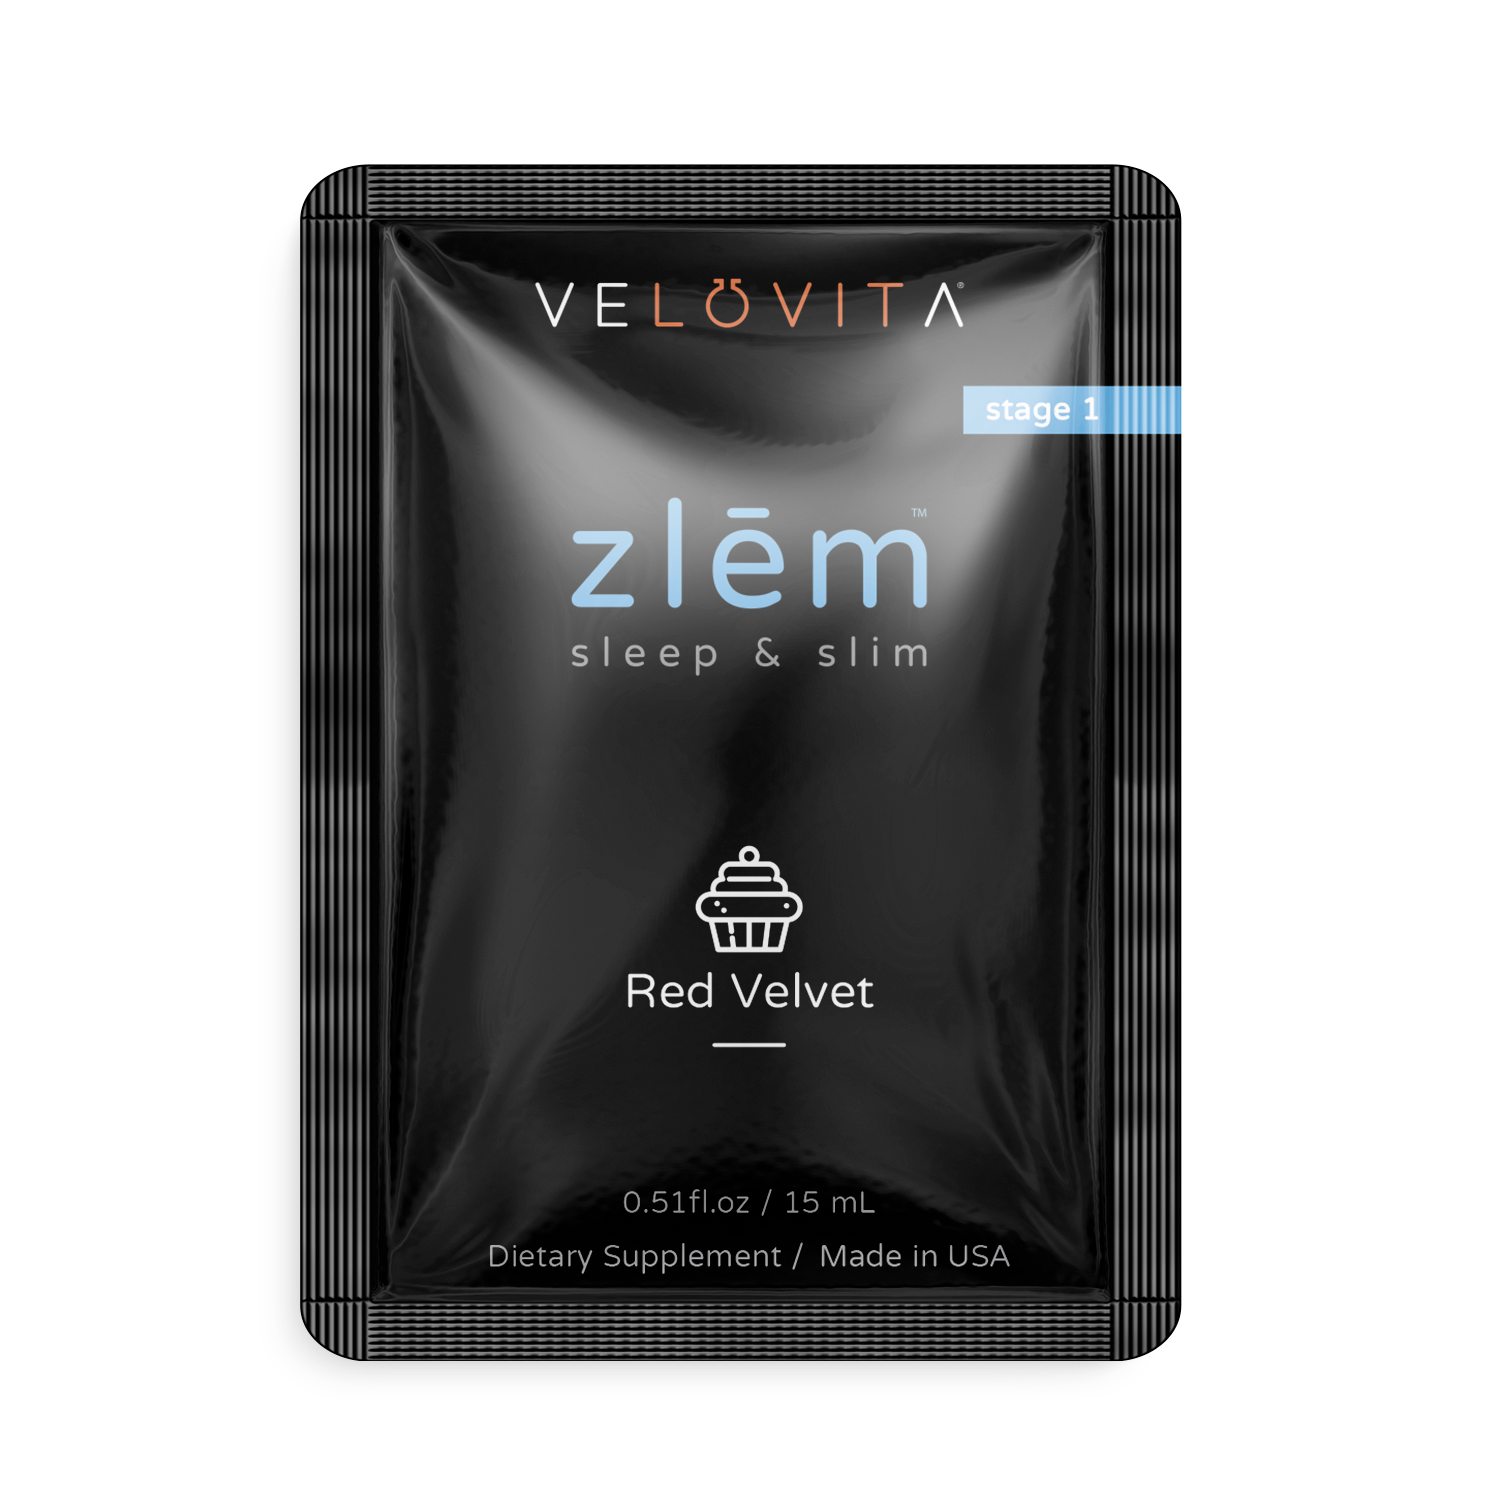  Go here to check this out to learn how to get a better nights sleep and slim with zlem